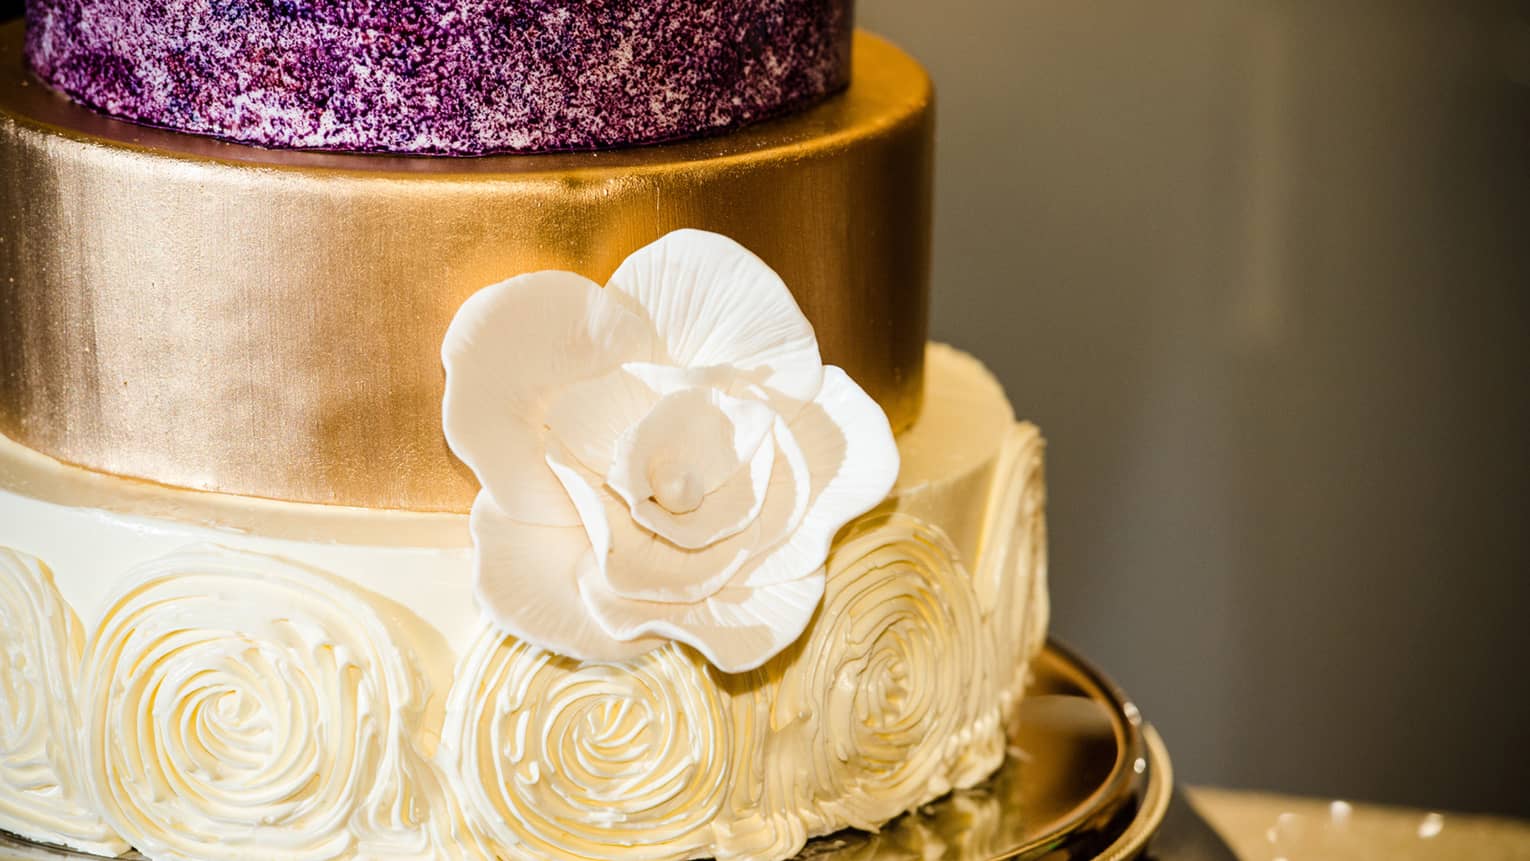 Wedding cake with purple, gold and white tiers decorated with icing flowers